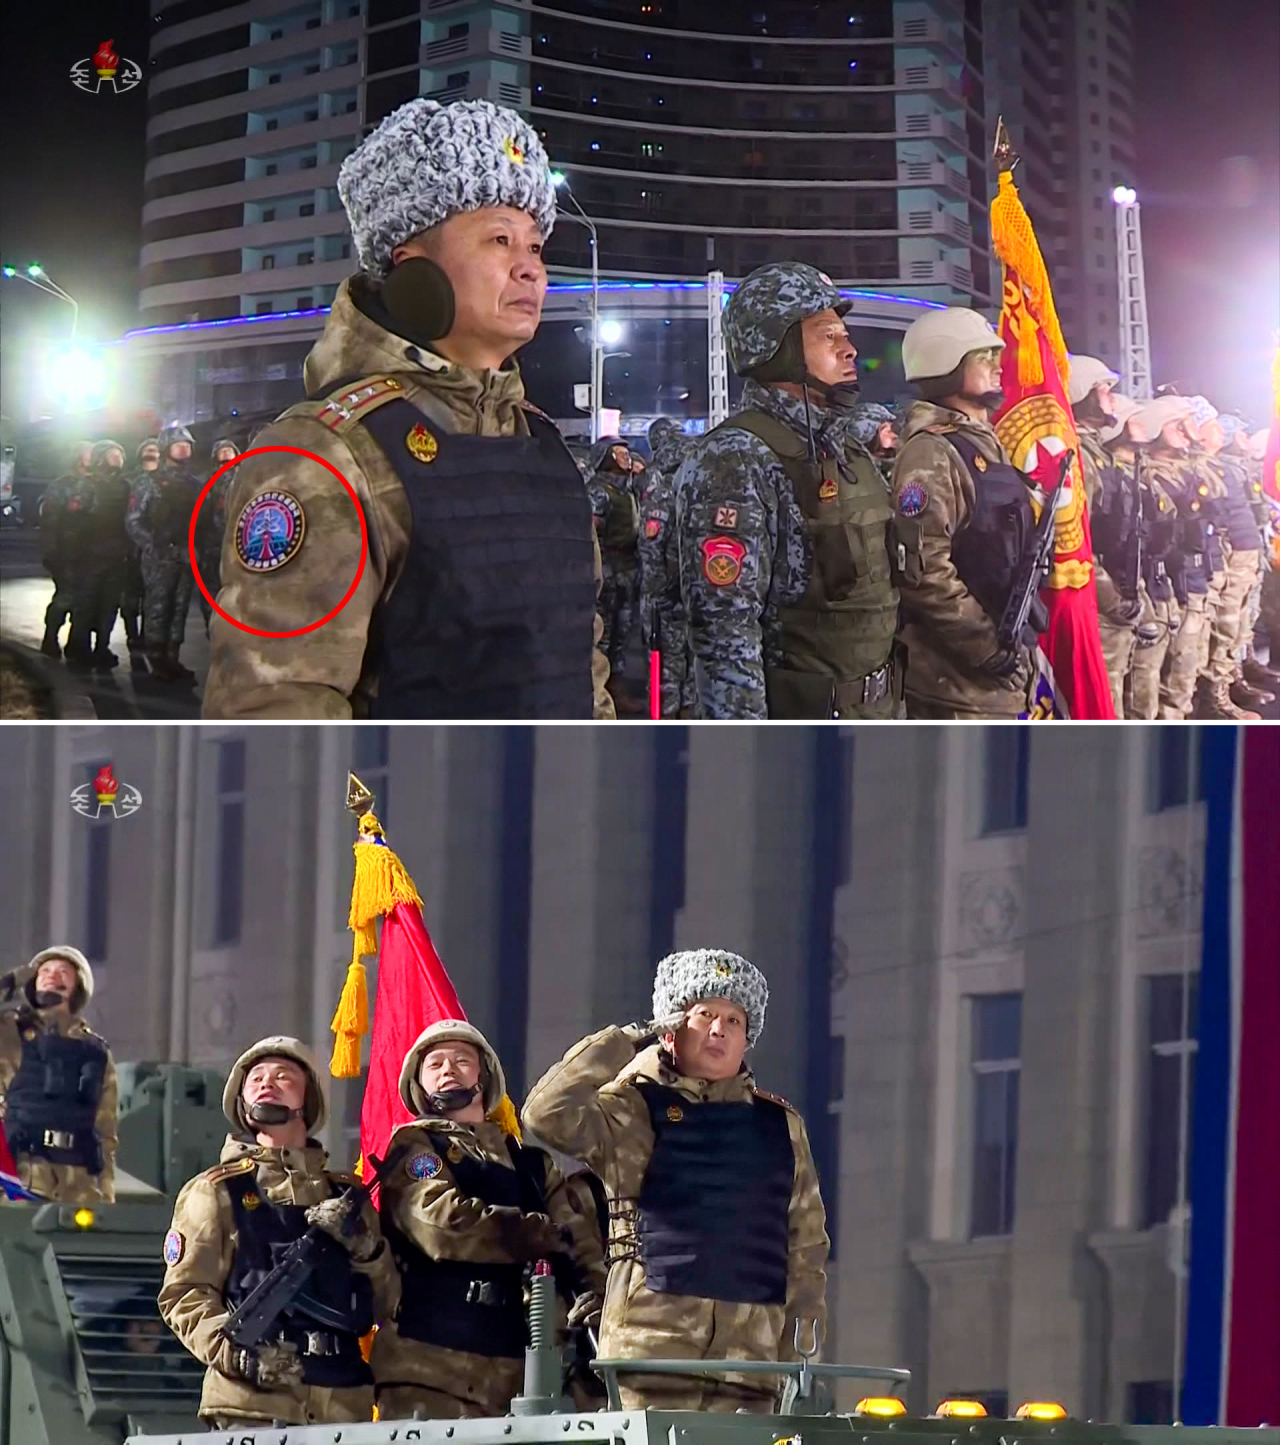 This captured image last Friday shows troops apparently belonging to the Missile General Bureau who participated in a military parade held the previous day at Kim Il Sung Square. (North Korea's Korean Central Television)